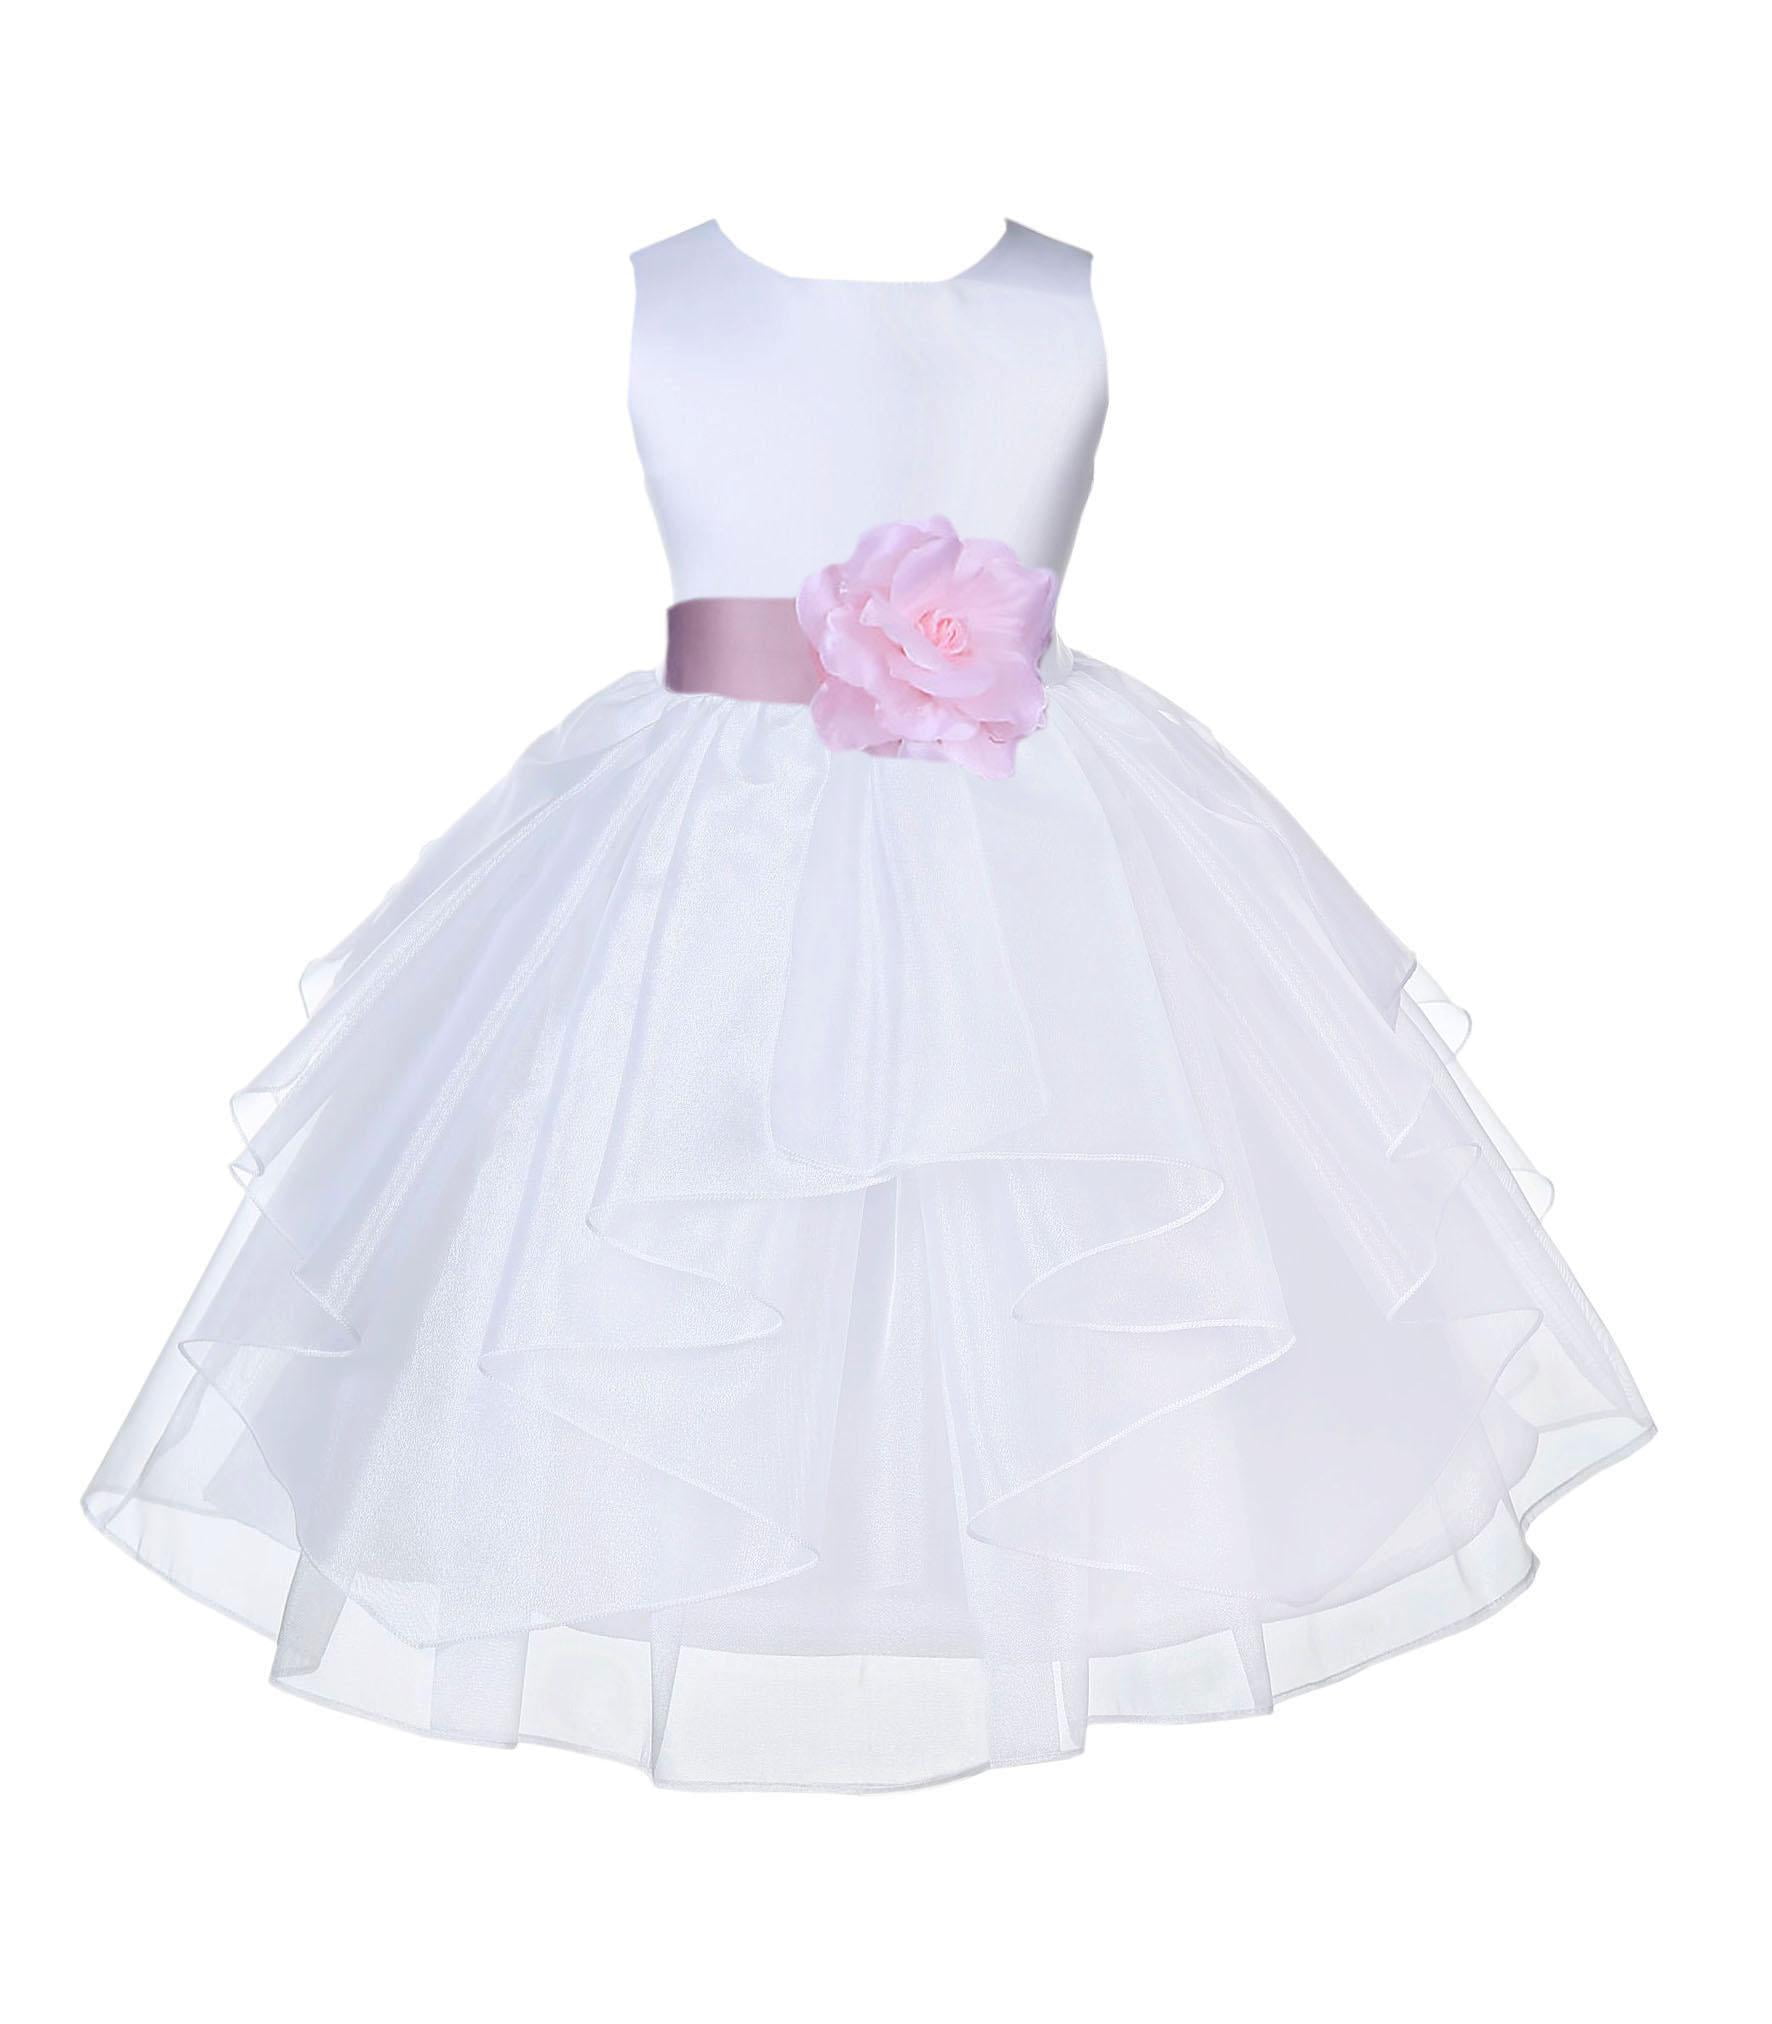 Pink Baby Easter Party Picture Wedding Flower Girl Dress 12M 18M 2 4 6 8 10 12 